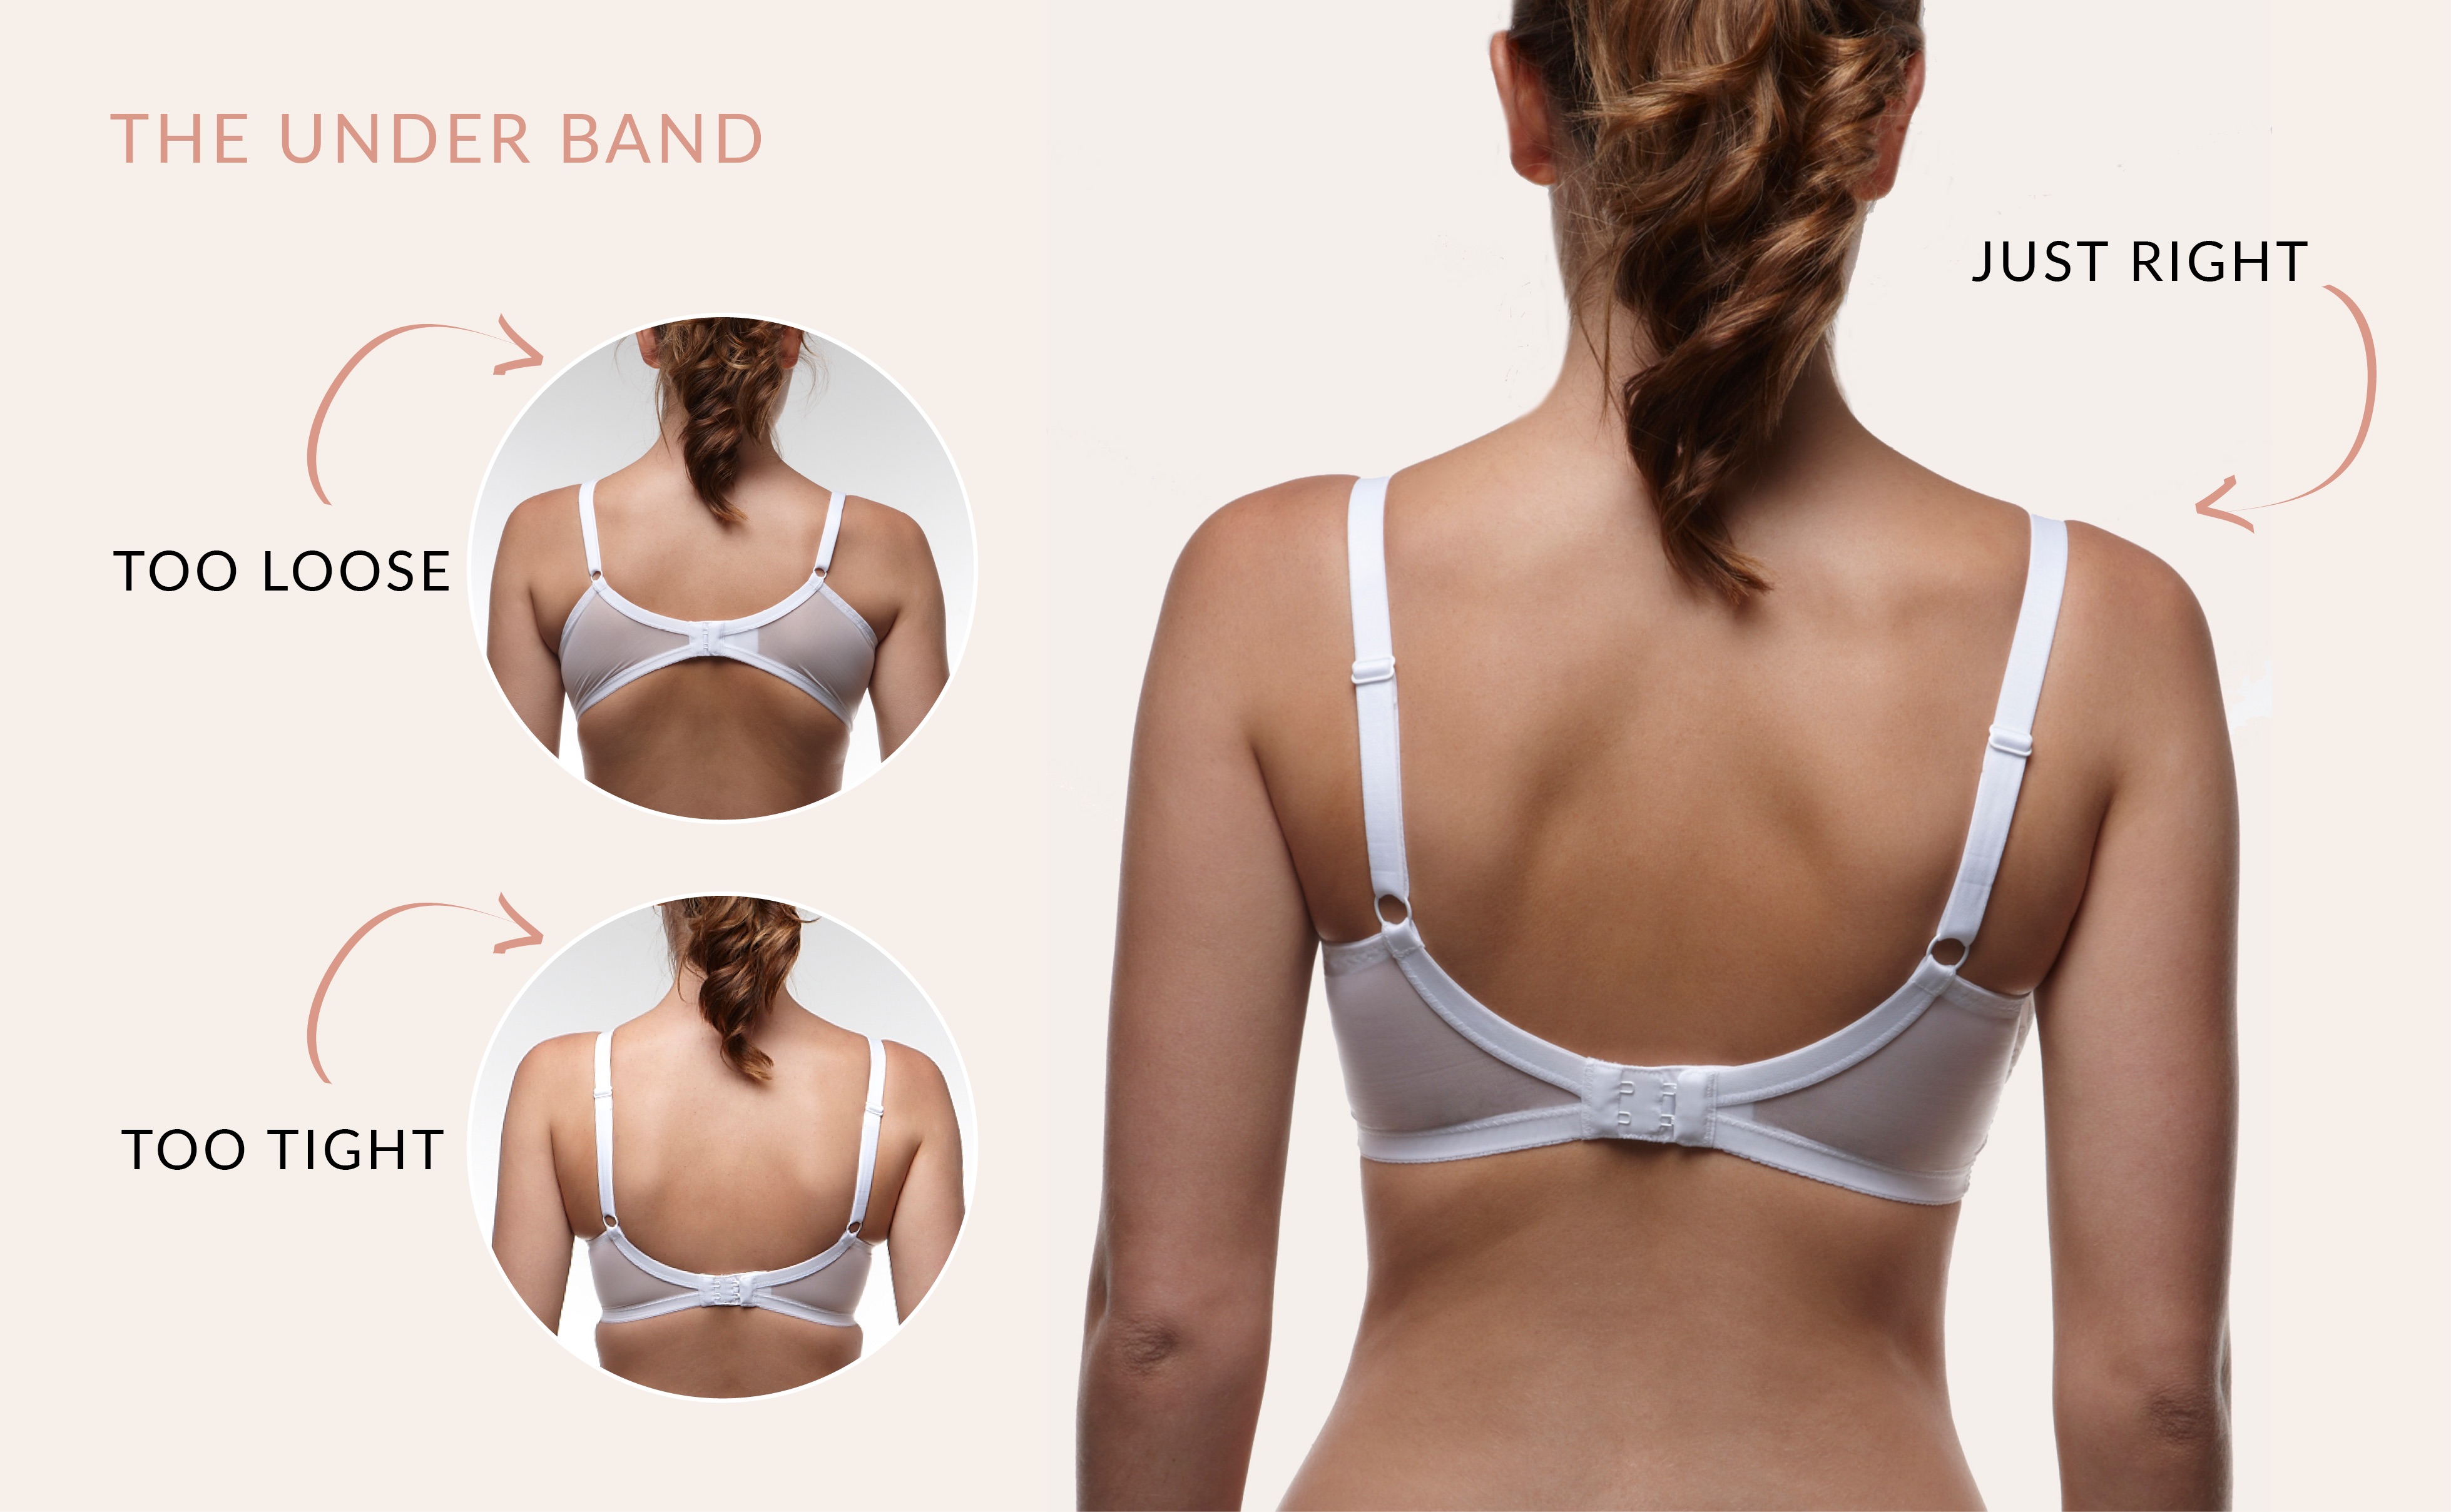 Ask A Bra Fitter: Why Is Bra Fitting An Art and Not An Exact